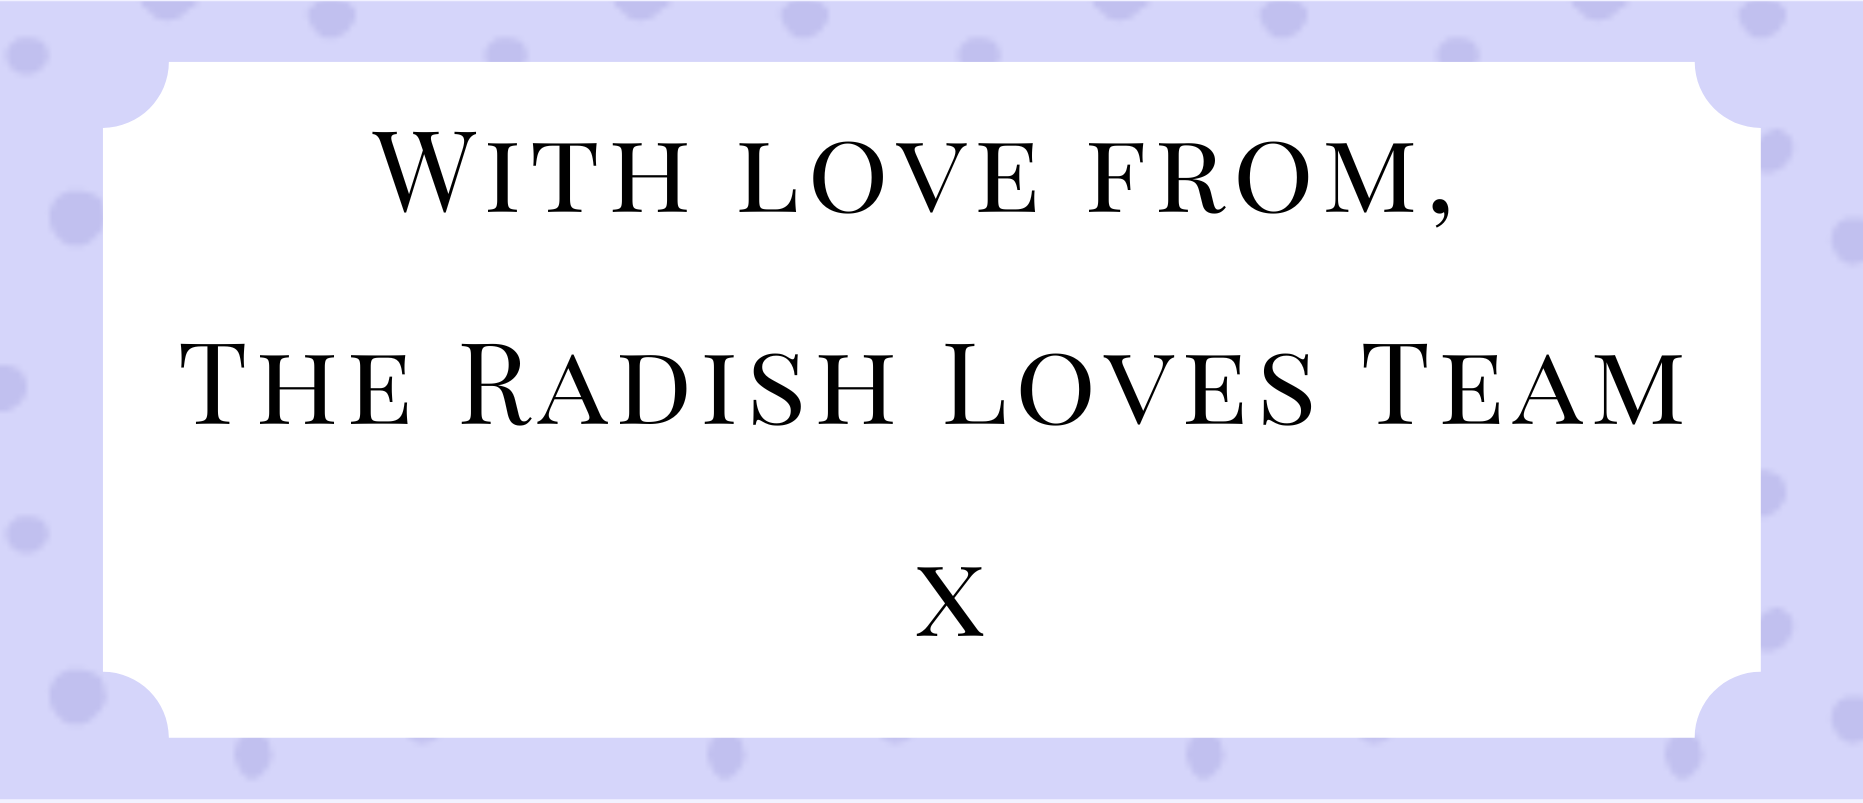 With love from the team at Radish loves